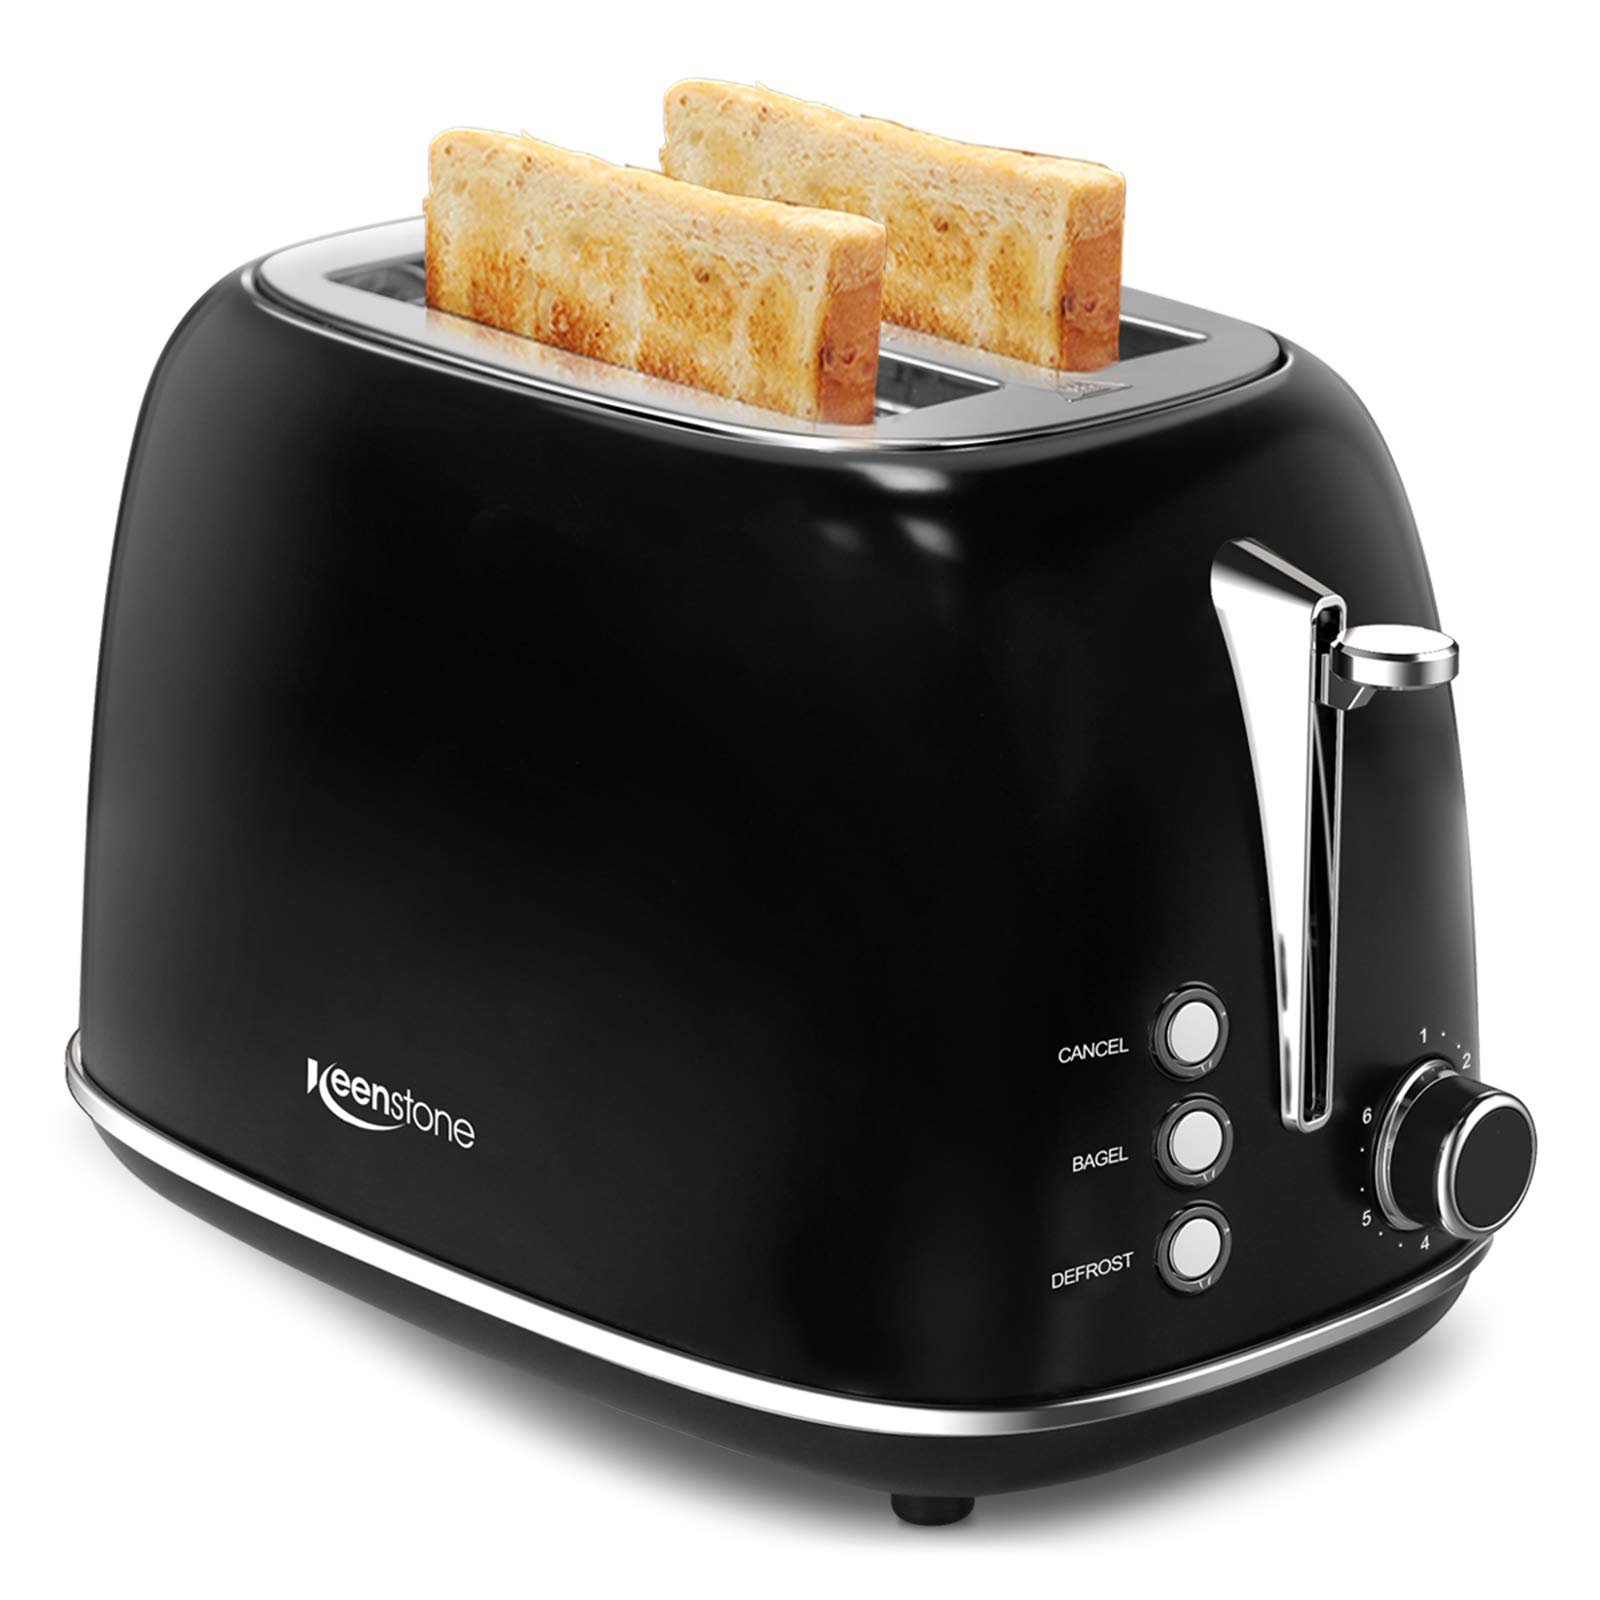 https://themarketdepot.com/wp-content/uploads/2023/01/Stainless-Steel-Toaster-Keenstone-Retro-2-Slice-Toaster-with-Bagel-Cancel-Defrost-Fuction-and-Extra-Wide-Slots-Toasters-6-Shade-SettingsRemovable-Crumb-TrayBlack-1.jpeg